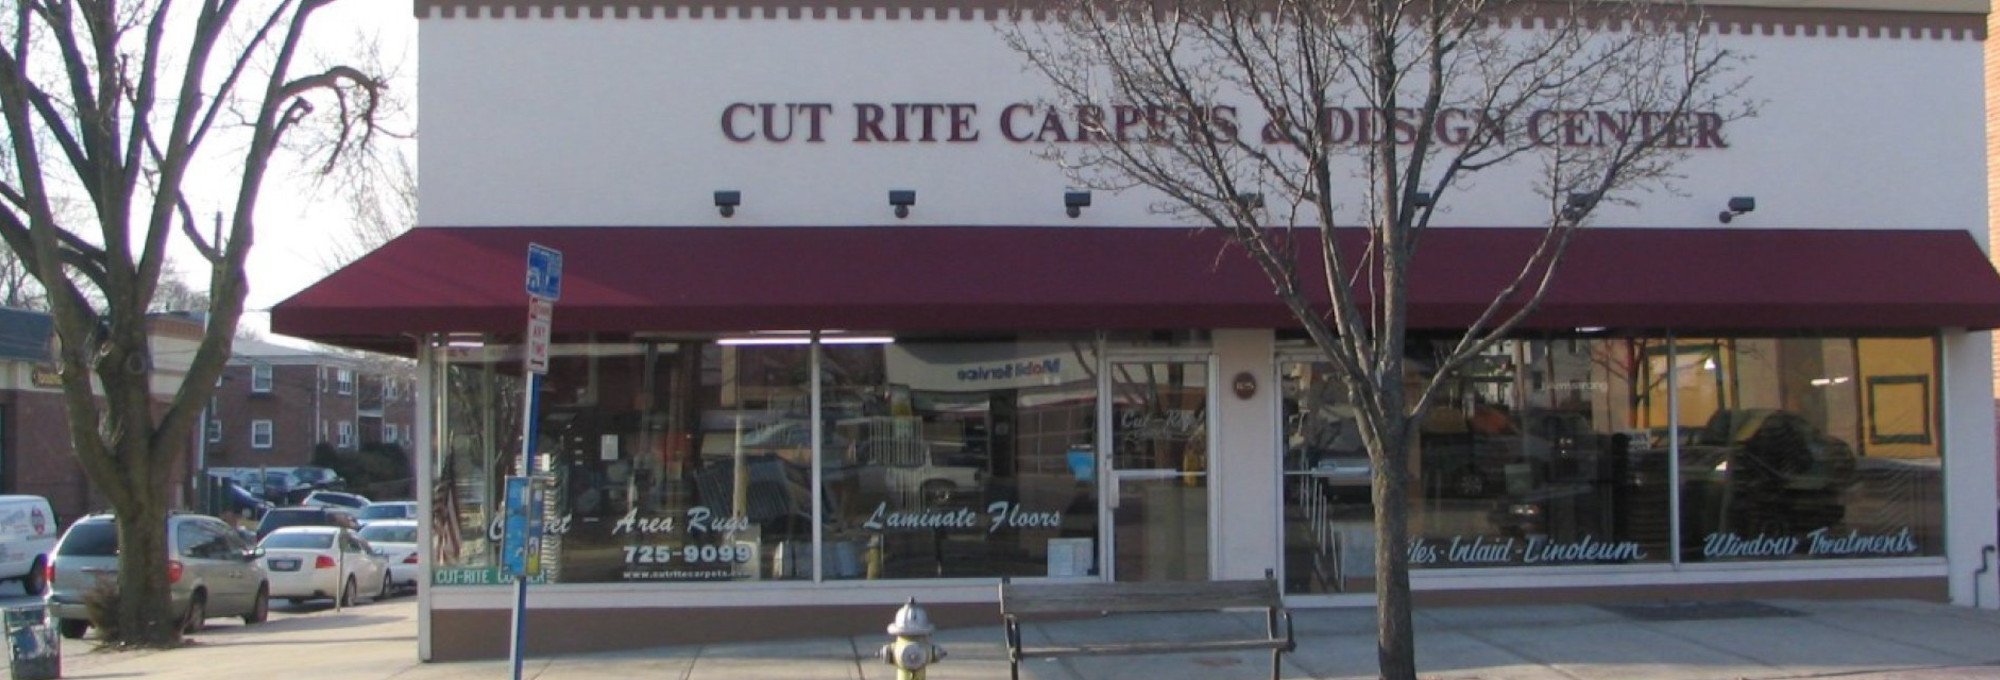 Showroom Front Imagery - Cut-Rite Carpets & Design Center in NY